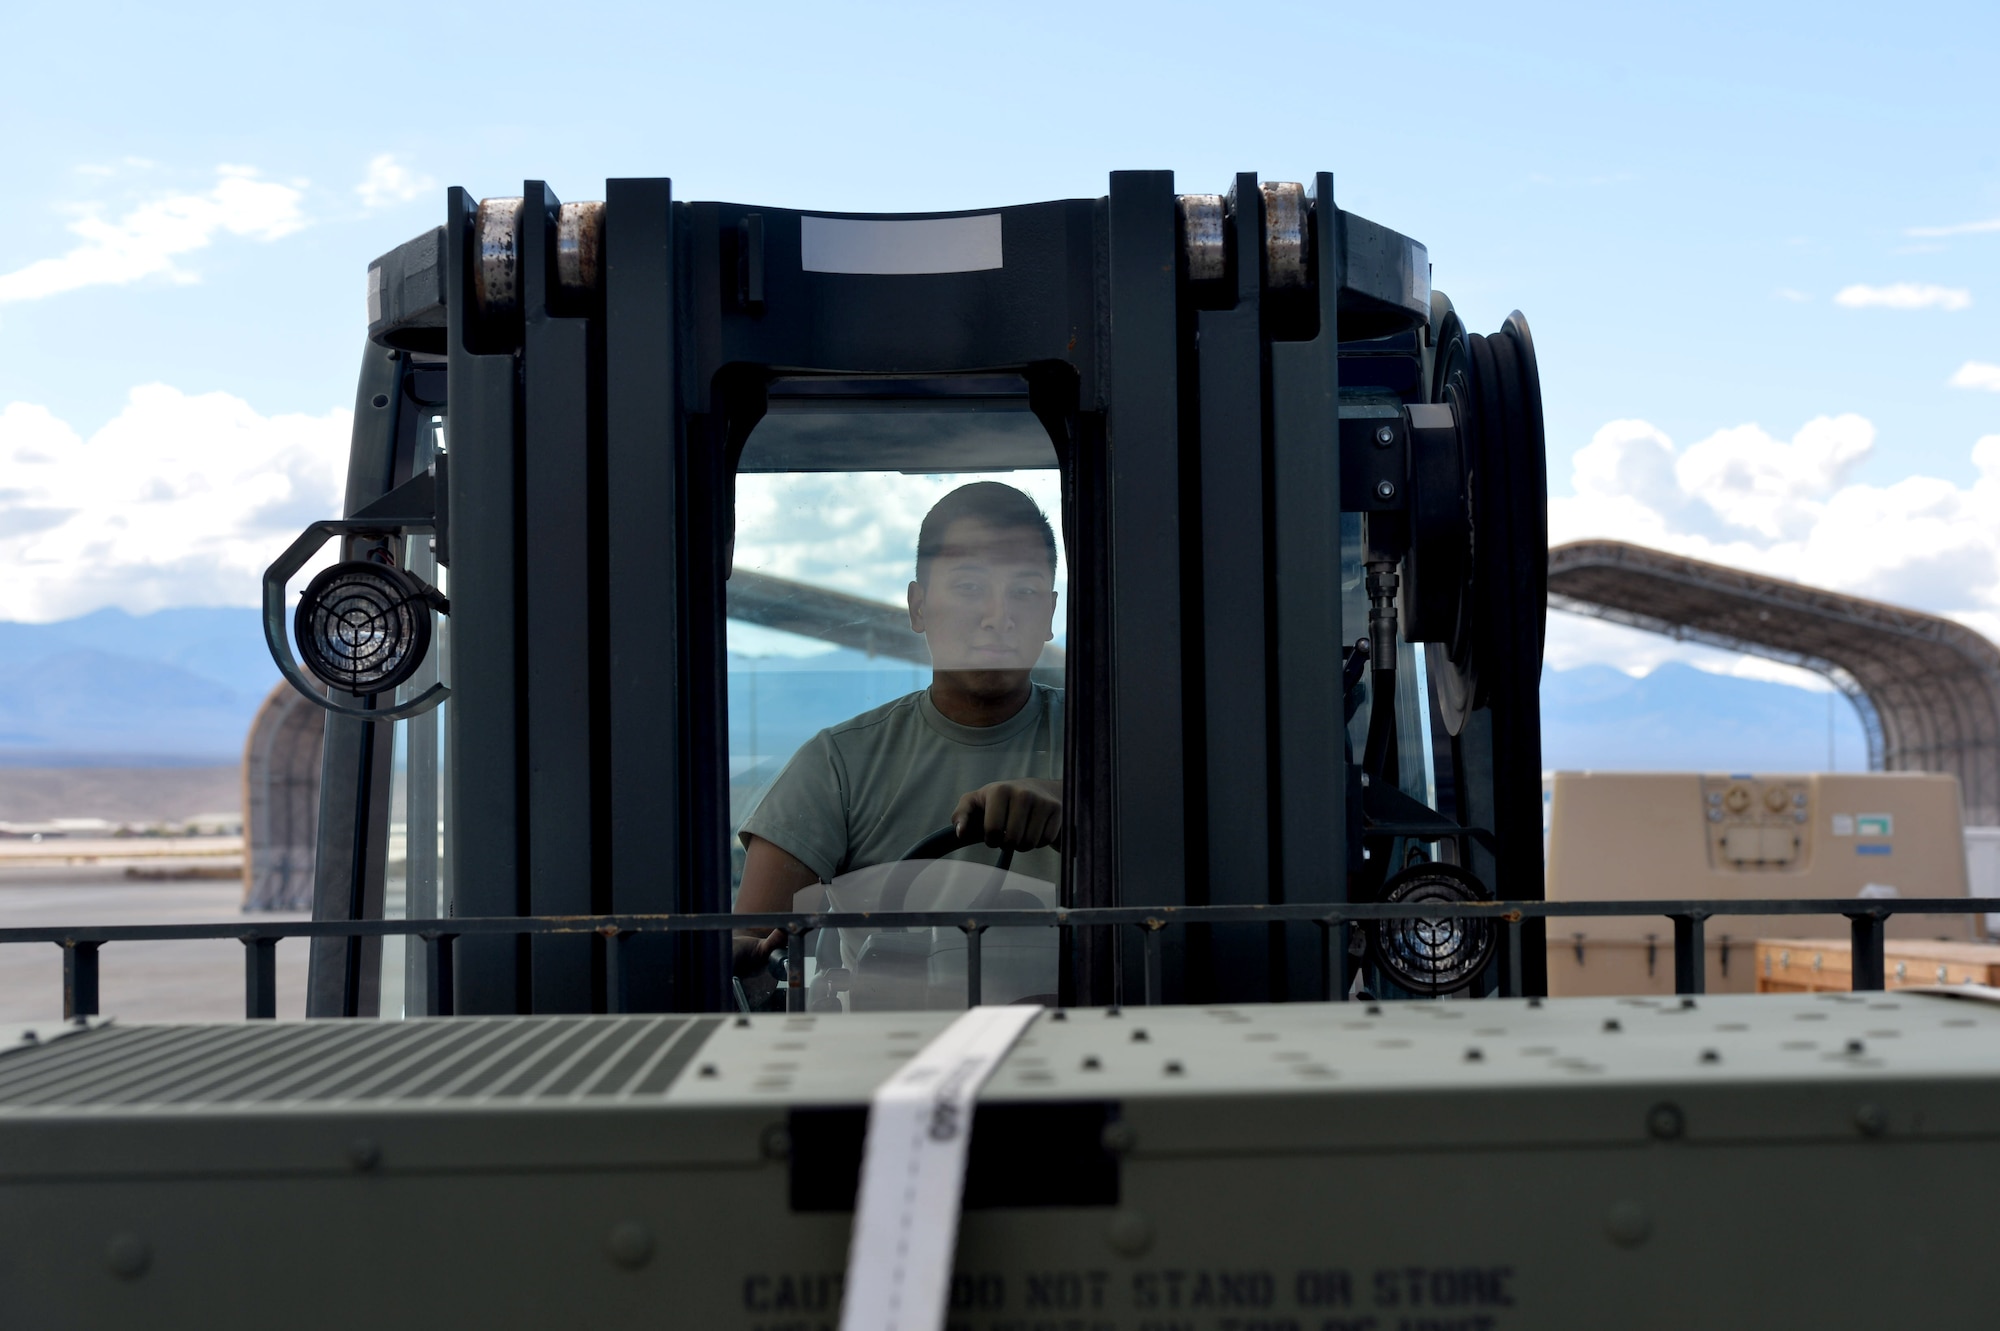 Airman 1st Class Josh, 432nd Maintenance Squadron Aerospace Ground Equipment journeyman, moves equipment to be shipped to a deployment location Oct. 6, 2015, at Creech Air Force Base, Nevada. The 432nd Maintenance Squadron AGE shop supports missions both at home and deployed locations by maintaining ground support equipment. In turn, this equipment is used to maintain remotely piloted aircraft and various other functions that support remotely piloted aircraft. (U.S. Air Force photo by Senior Airman Christian Clausen/Released)